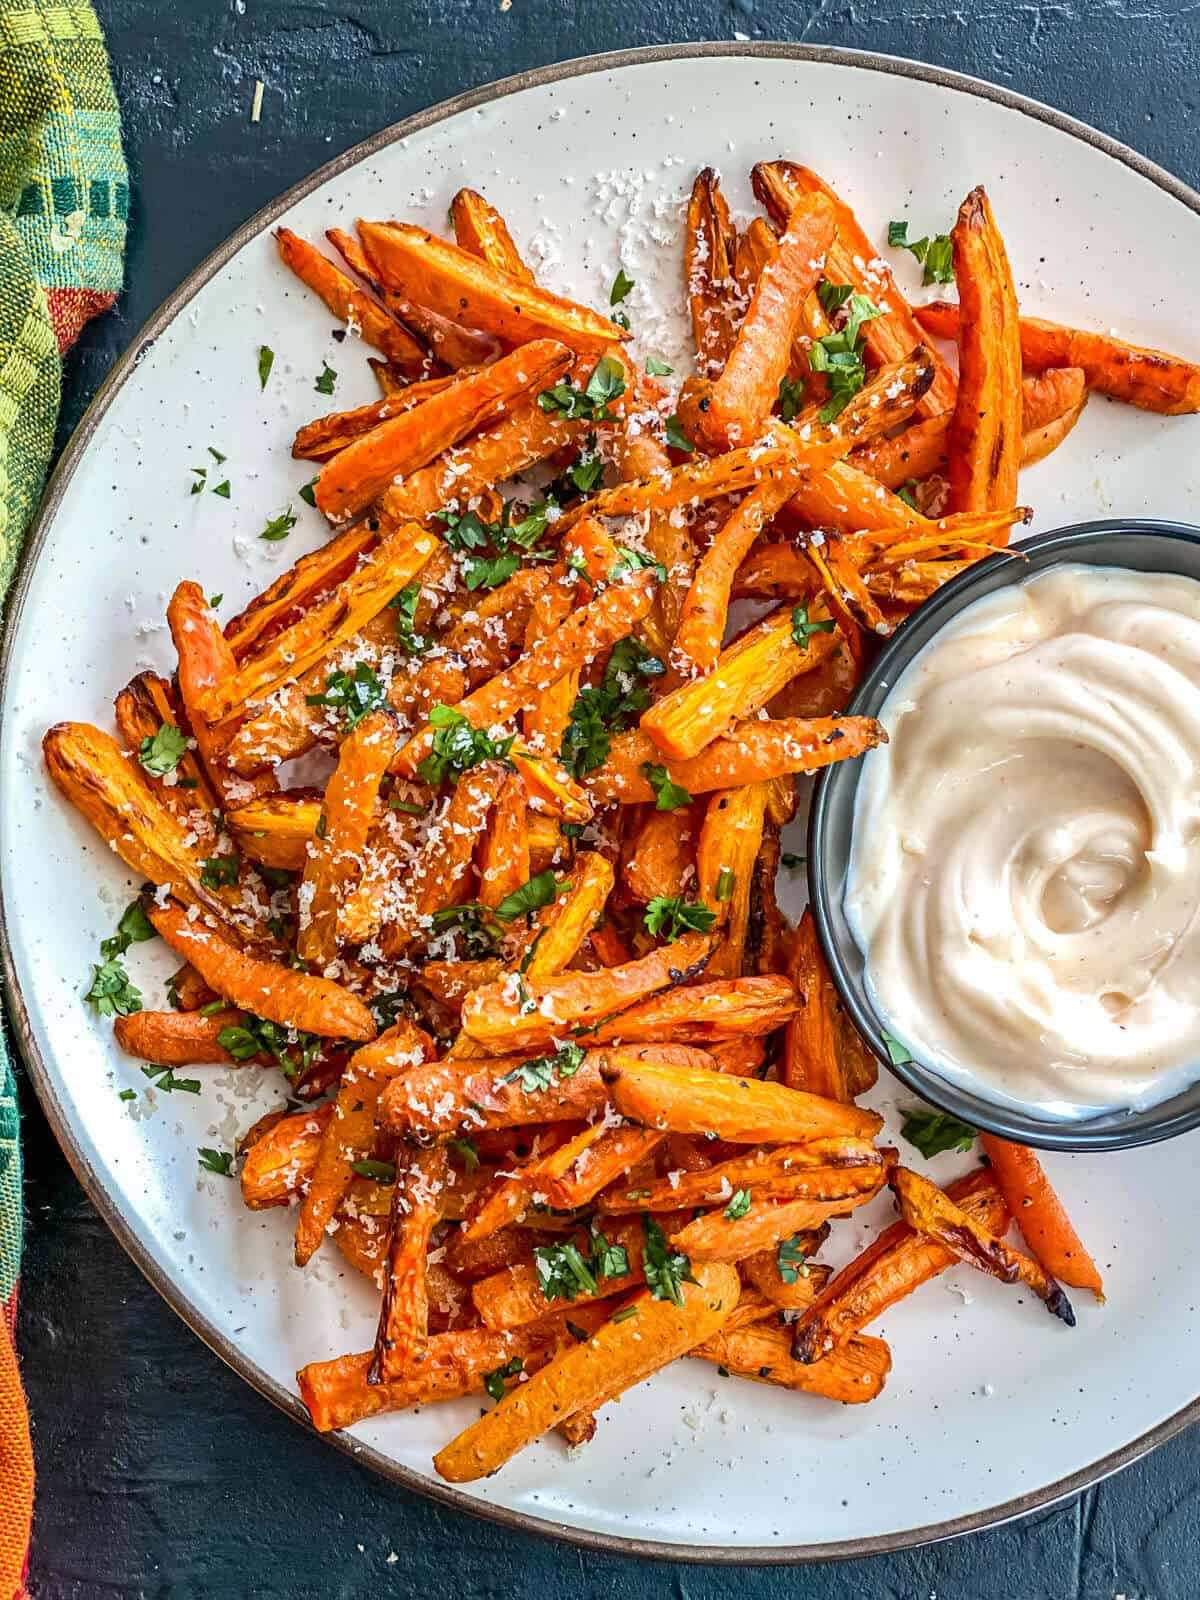 A plate filled with carrot sticks, garnished with parsley and served with a creamy dip on the side.